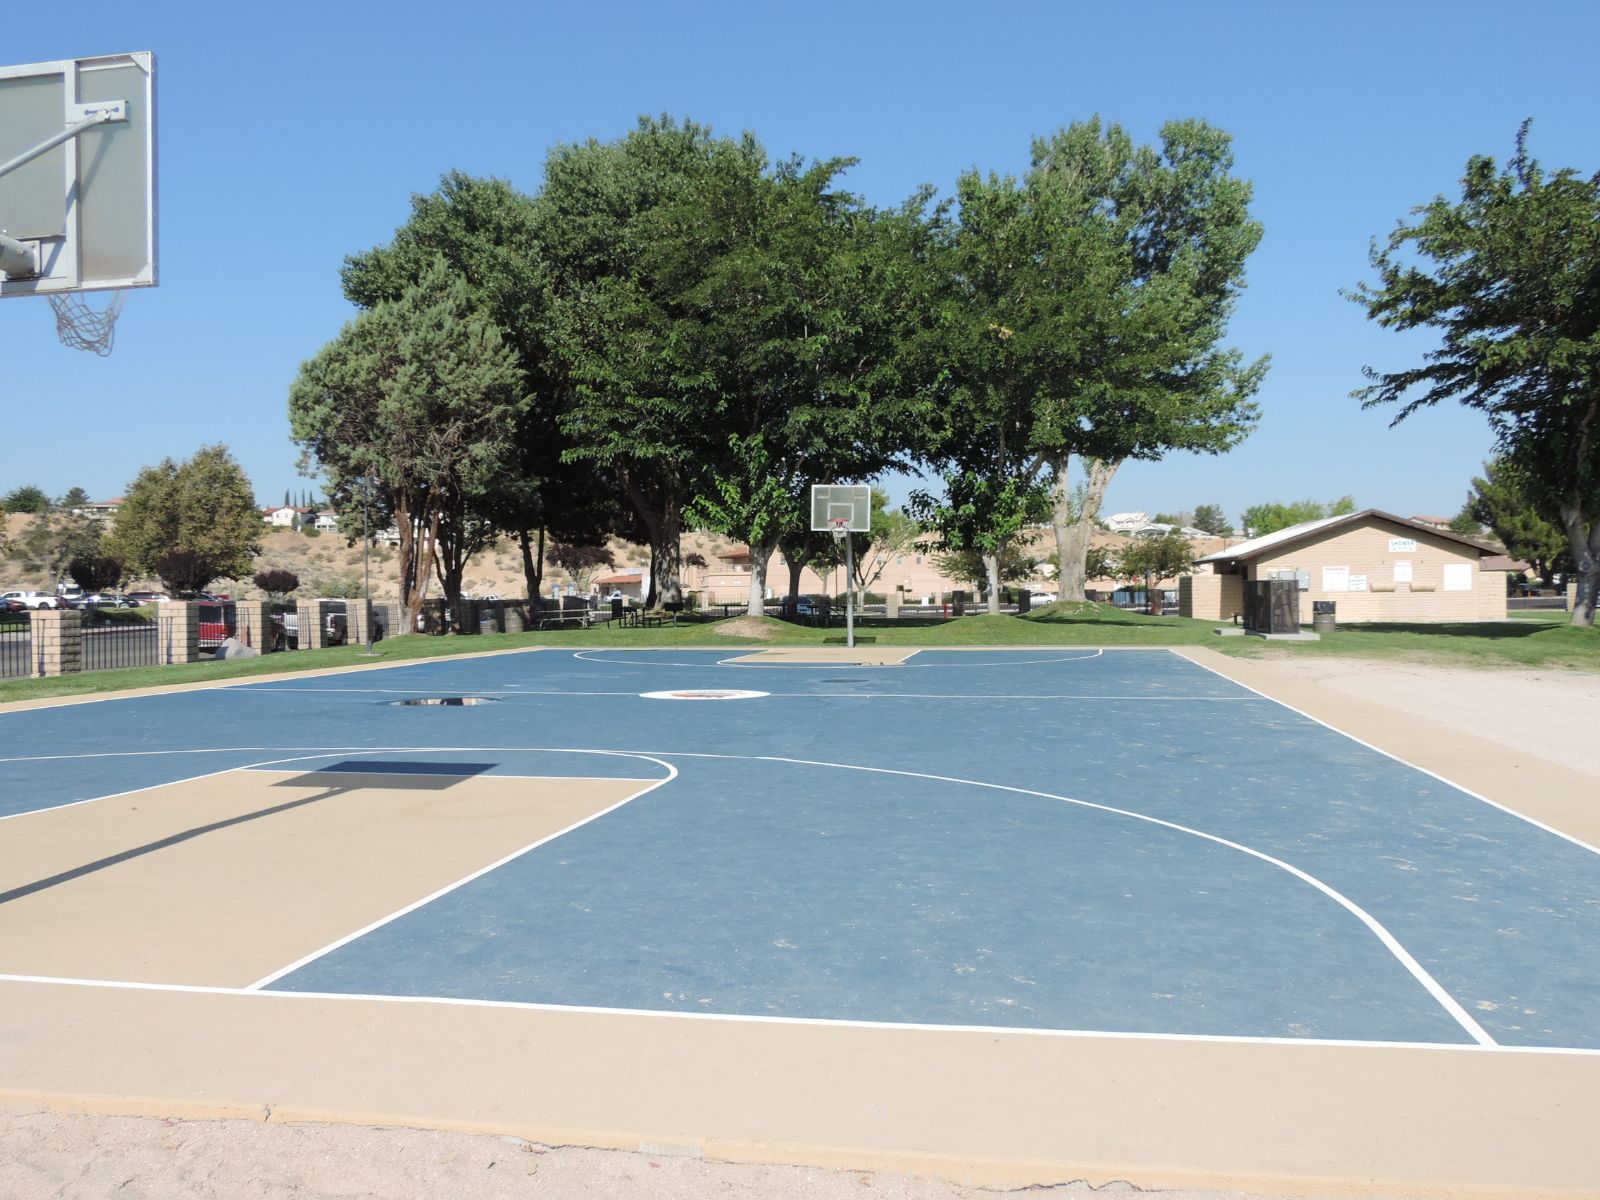 West Beach Basketball courts